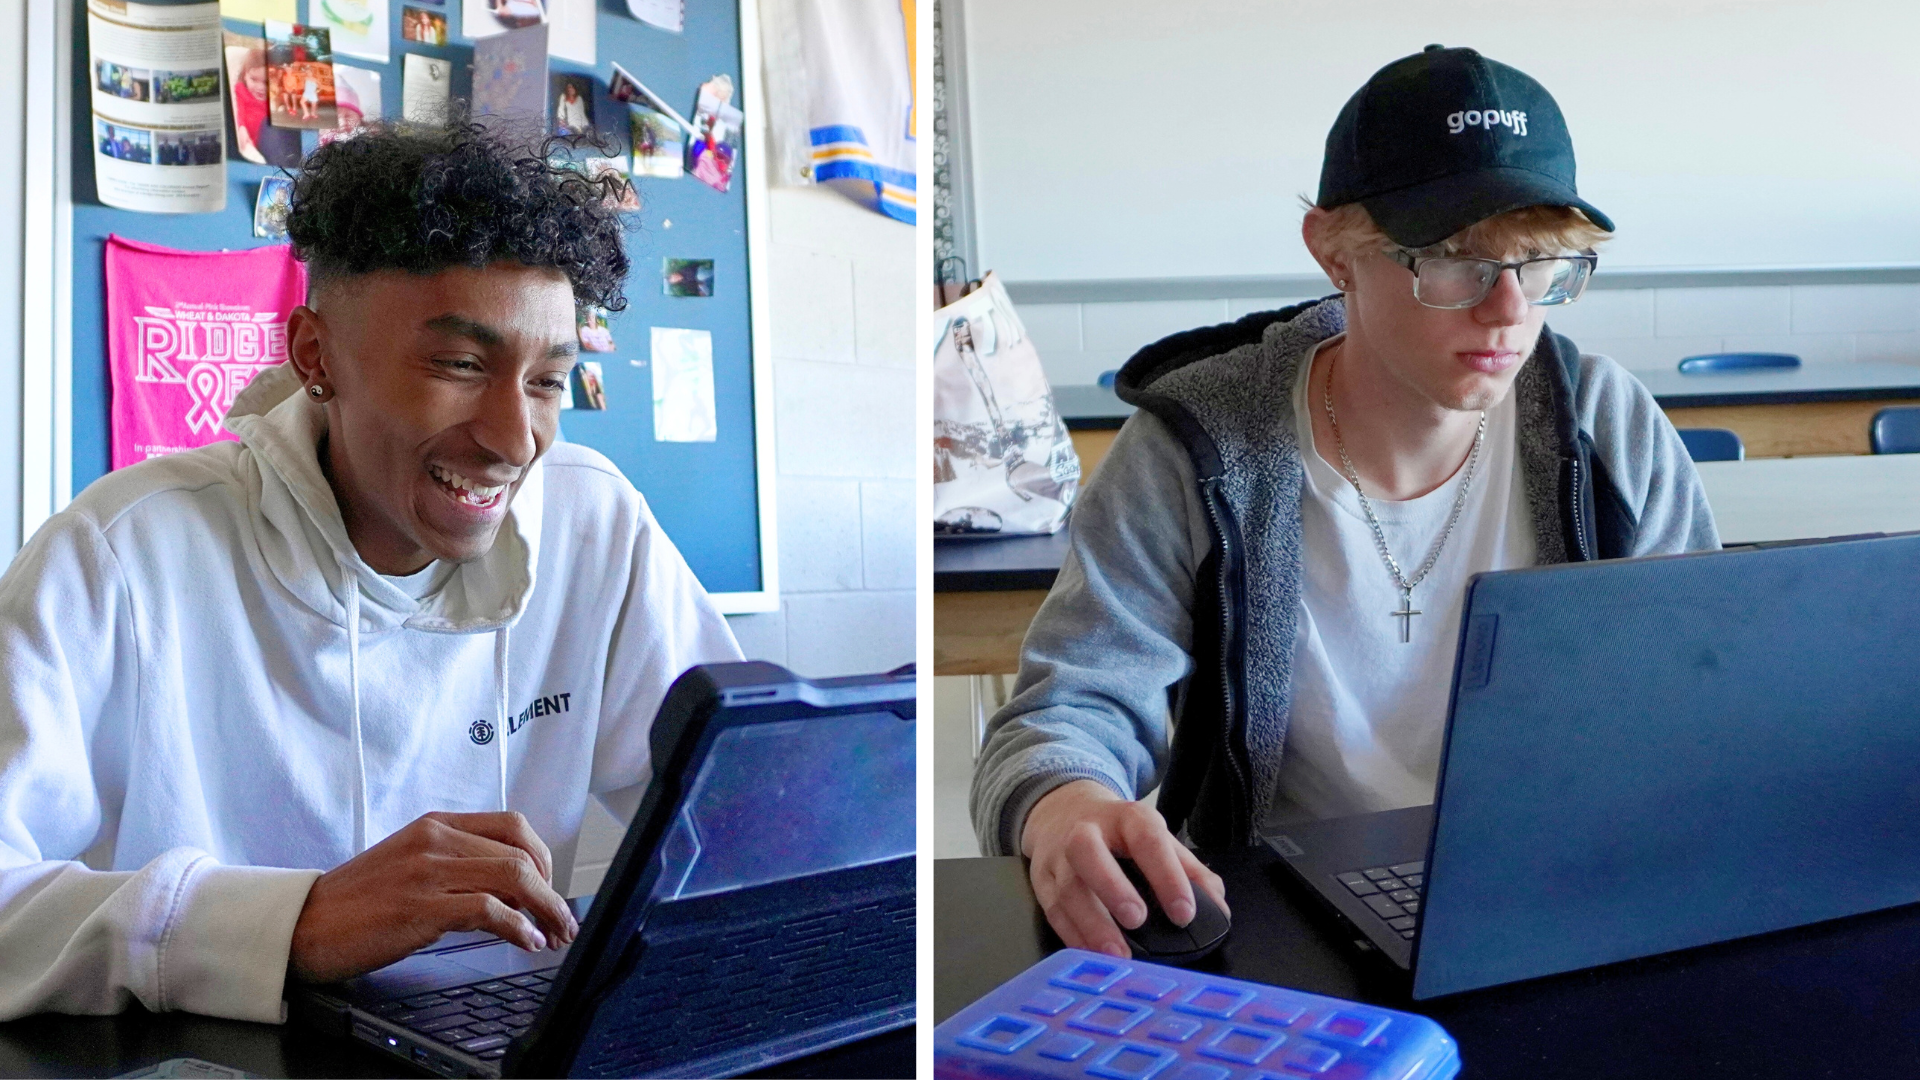 Students participating in Easterseals Colorado's digital literacy and employment training program at Wheat Ridge High School.